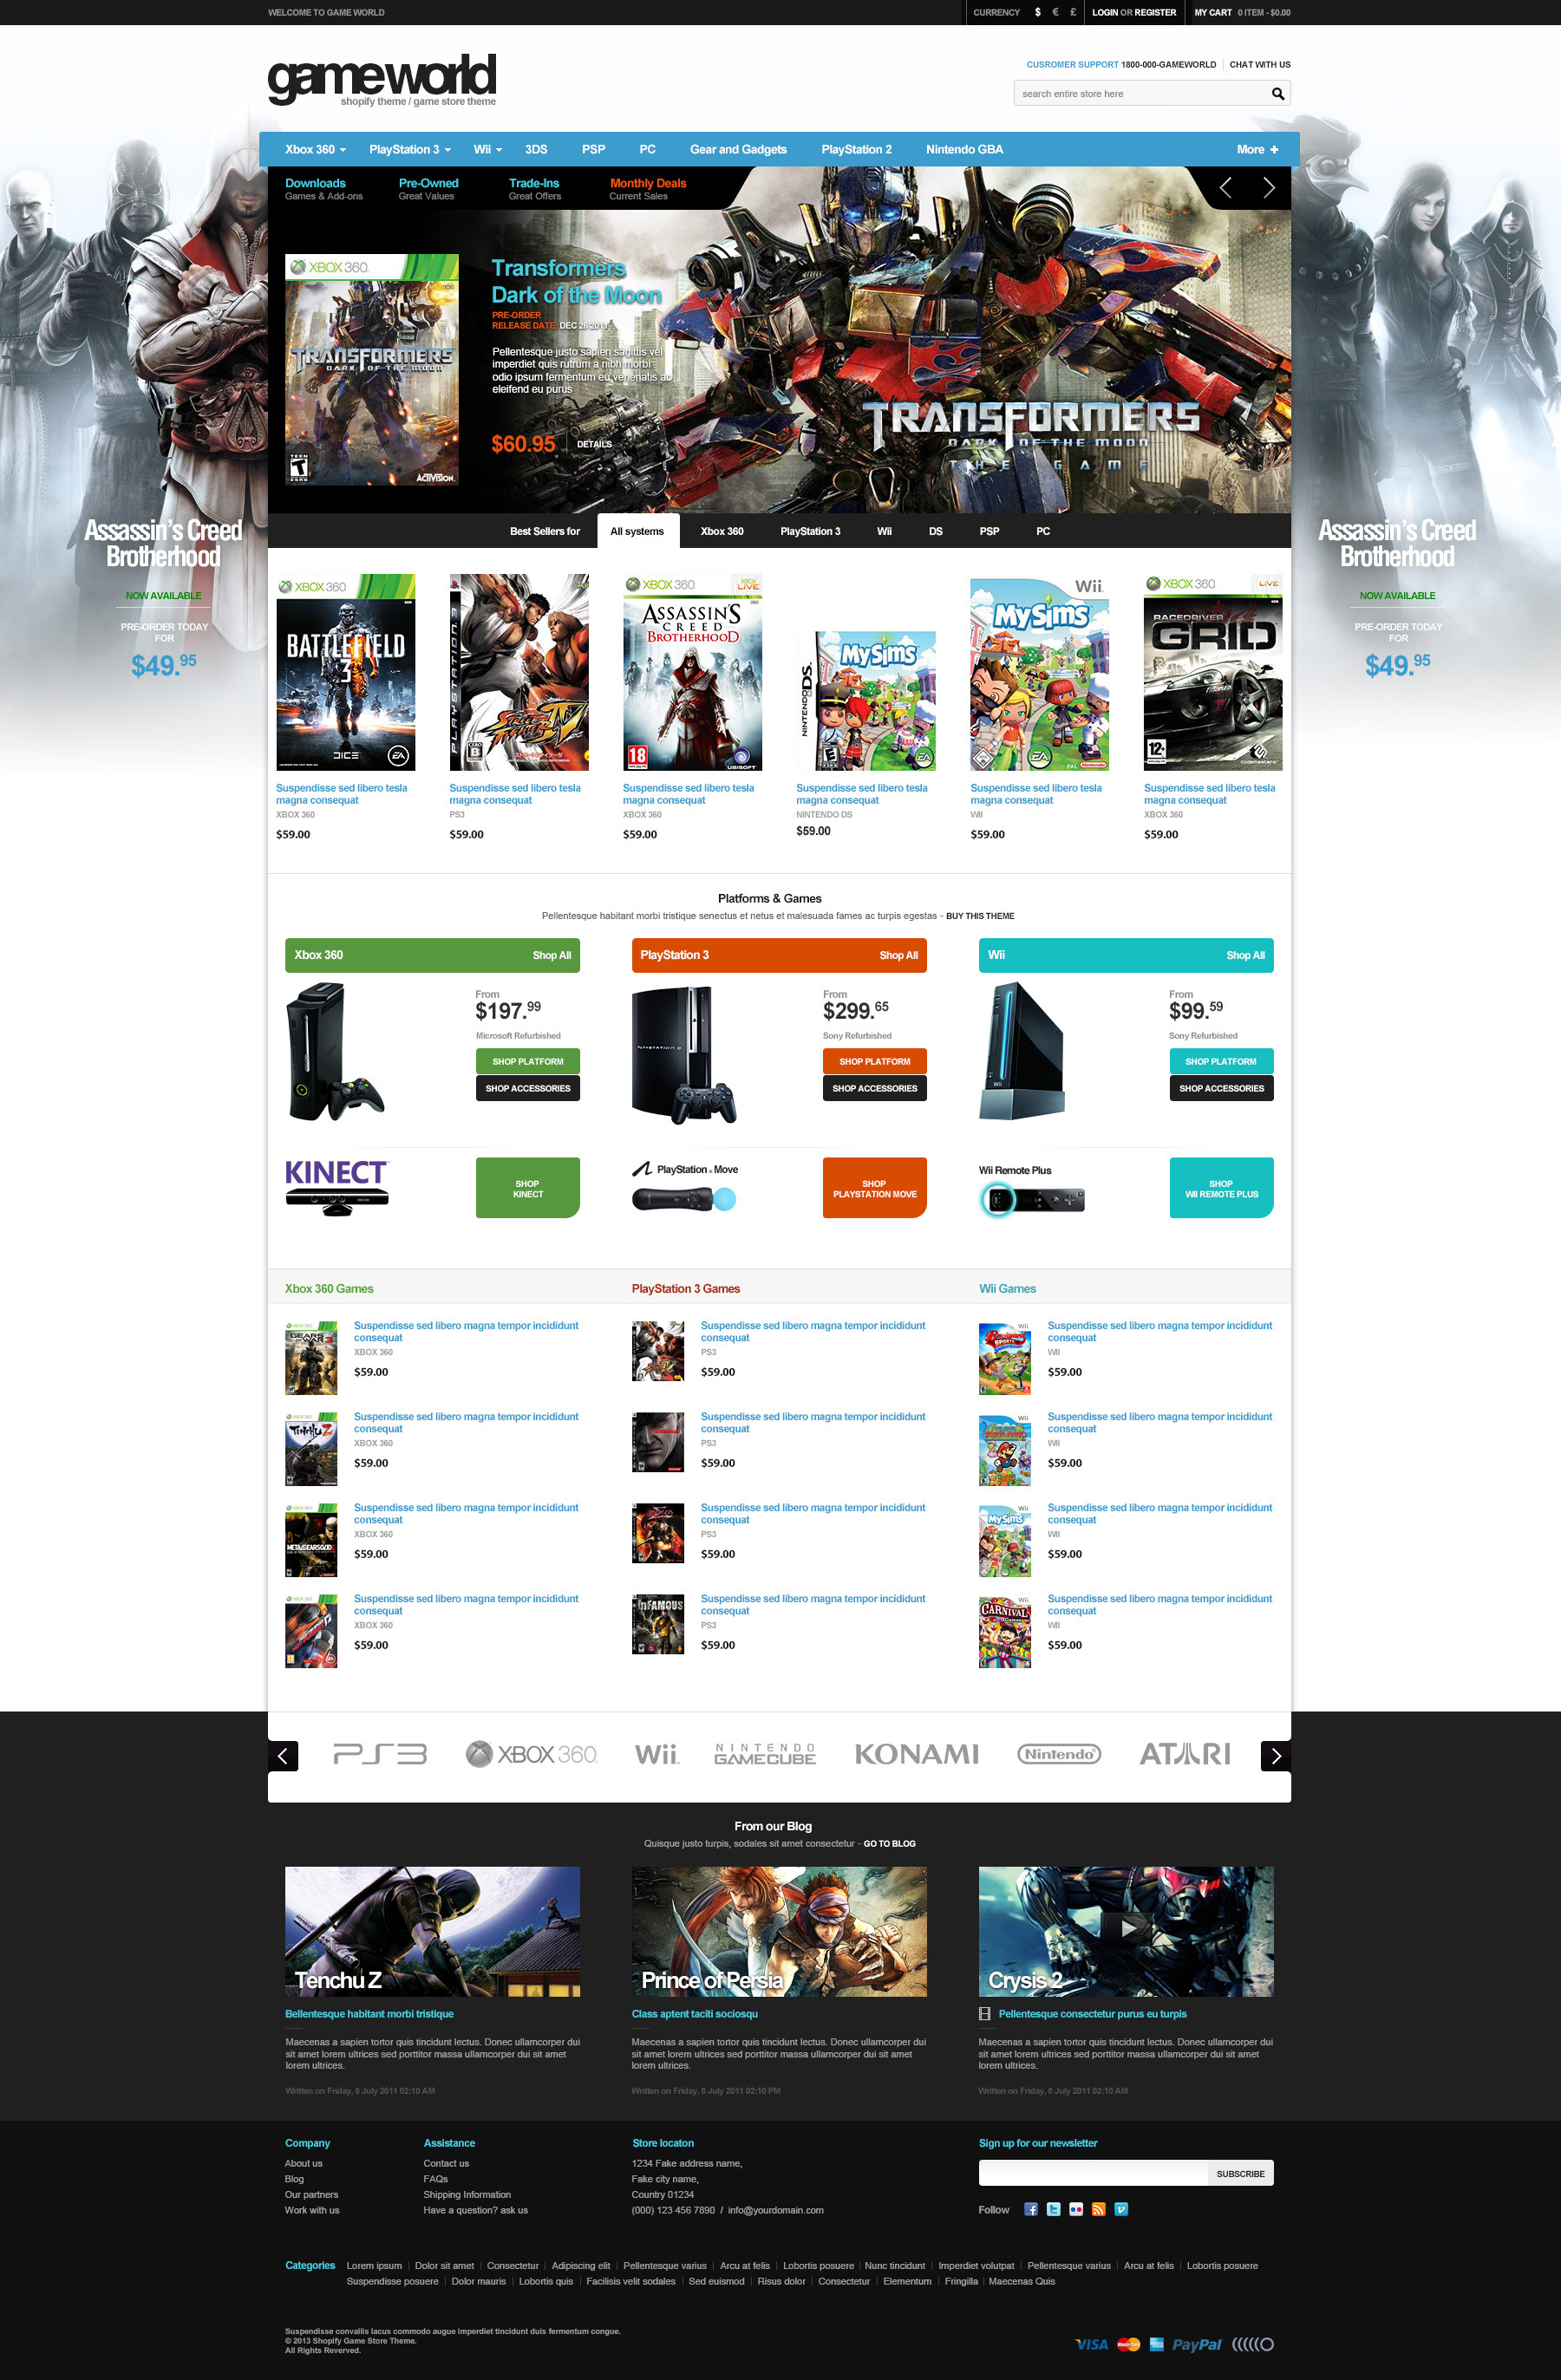 game store site